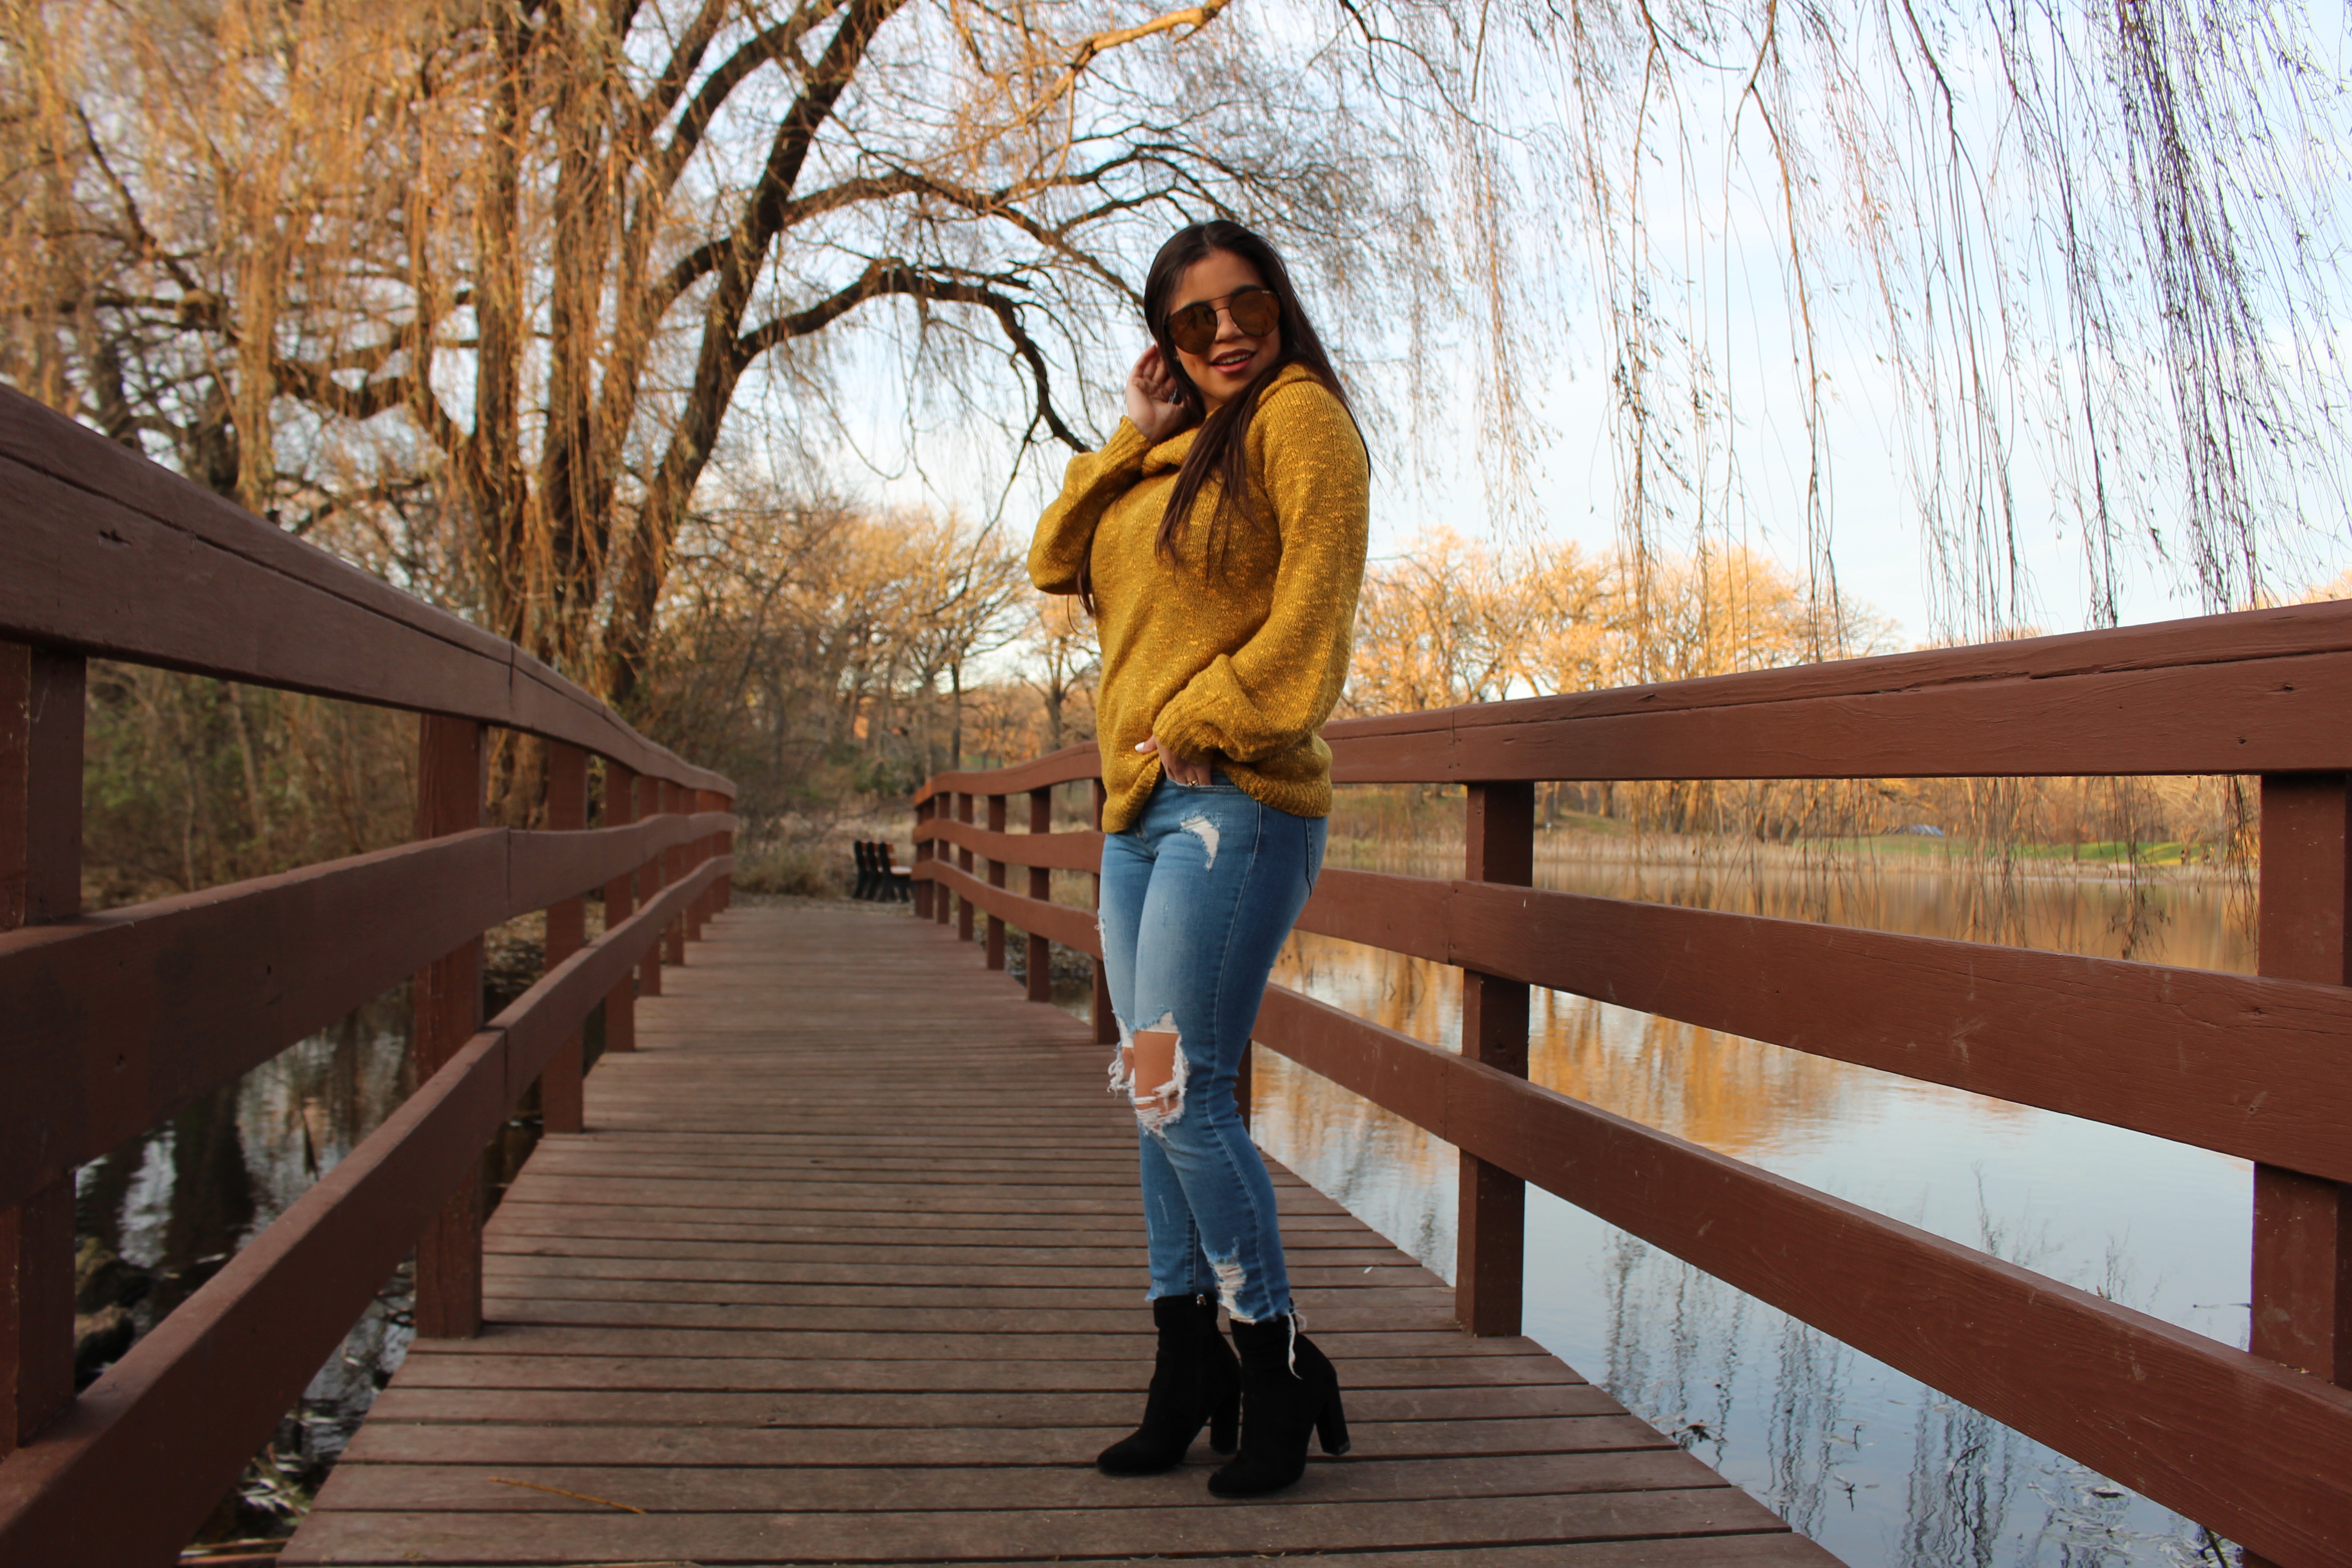 sweater mostaza cut out jeans fall outfit OOTD perfect fall outfit steve madden booties quay australia sunglasses indio by alejandra avila tufashionpetite